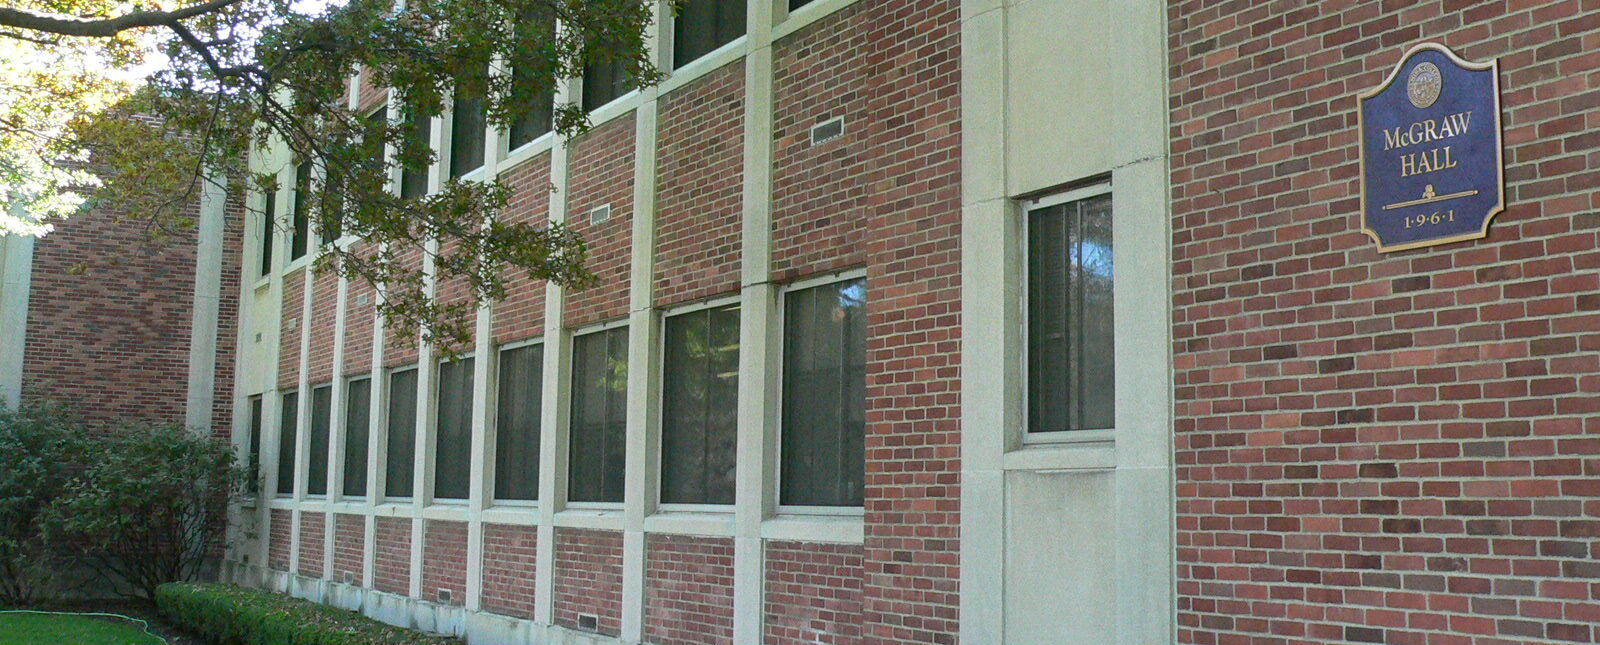 The side of McGraw Hall with its brick exterior and rows of first floor and second floor windows